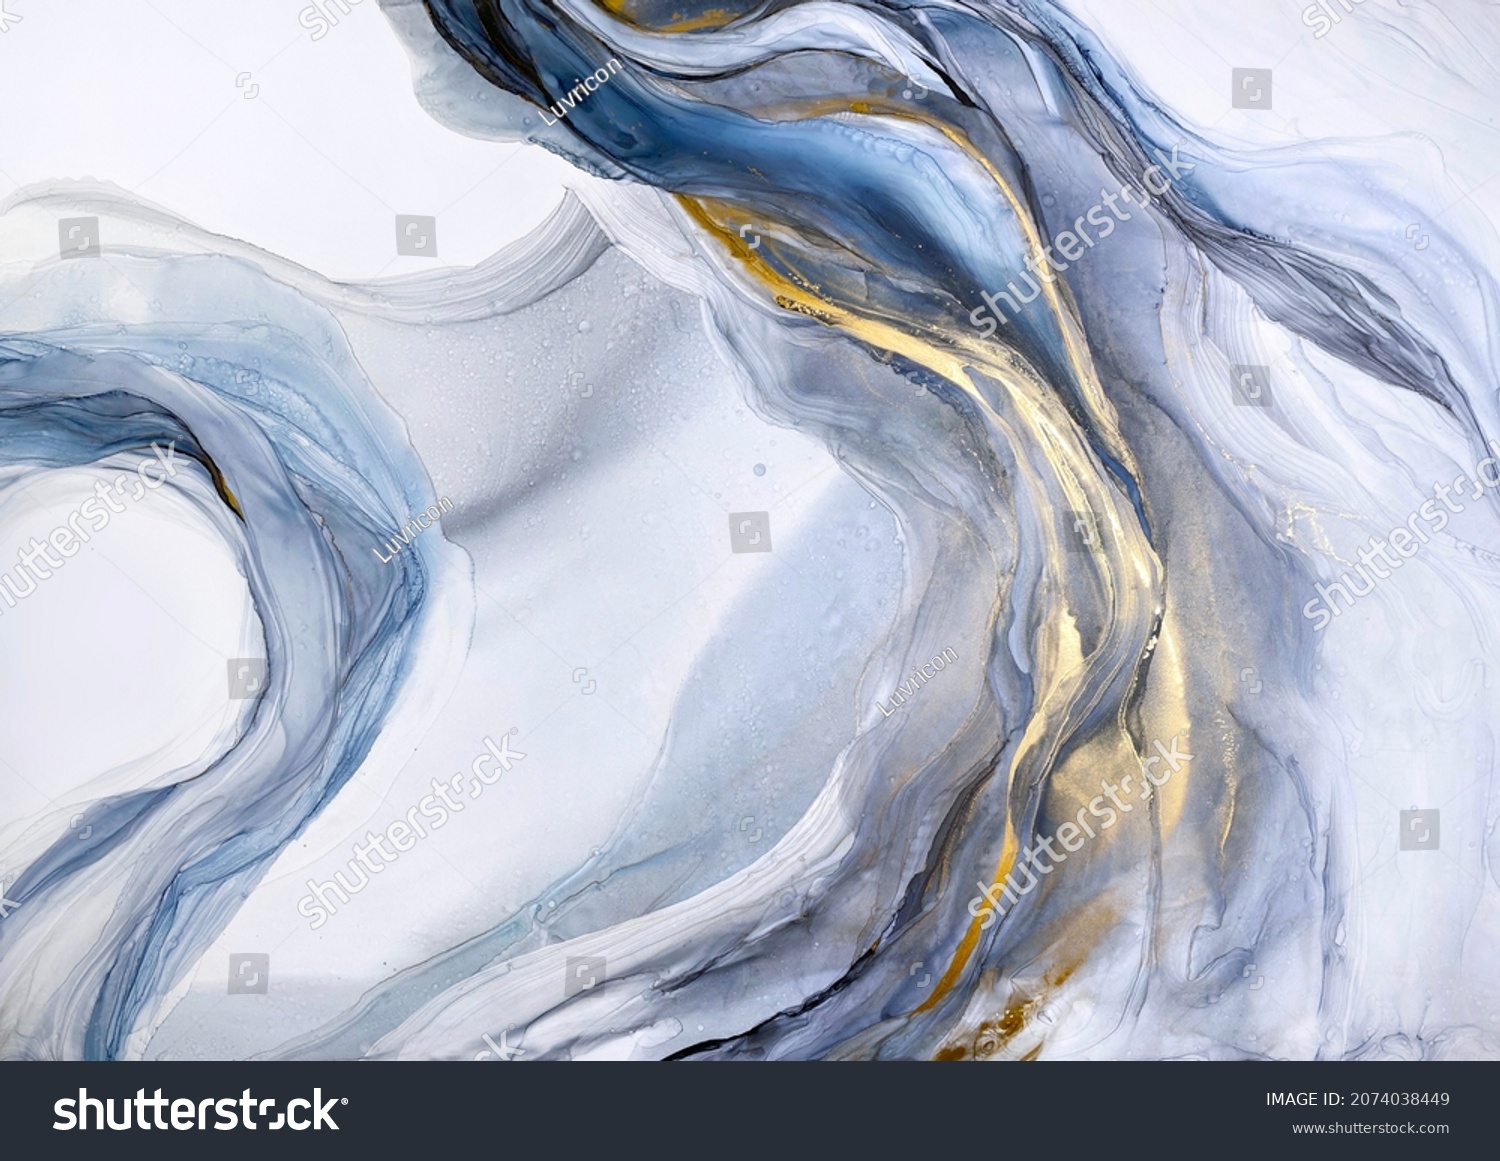 Abstract blue art with gray and gold — light blue background with beautiful smudges and stains made with alcohol ink and golden paint. Blue fluid texture poster resembles watercolor or aquarelle. #2074038449